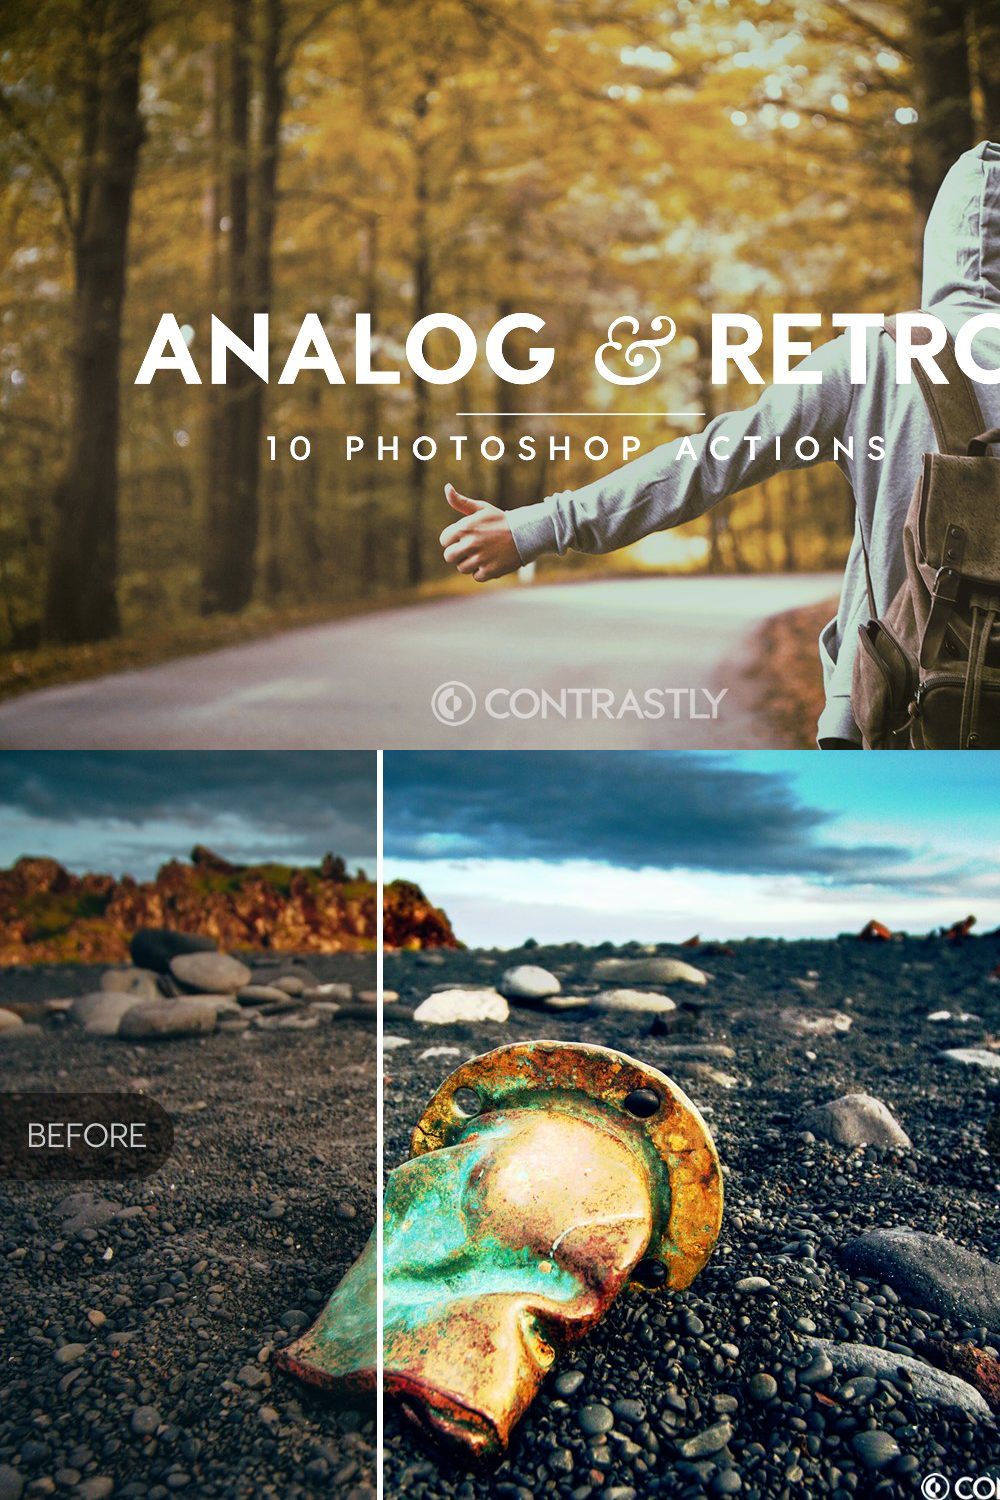 Analog & Retro Photoshop Actions pinterest preview image.